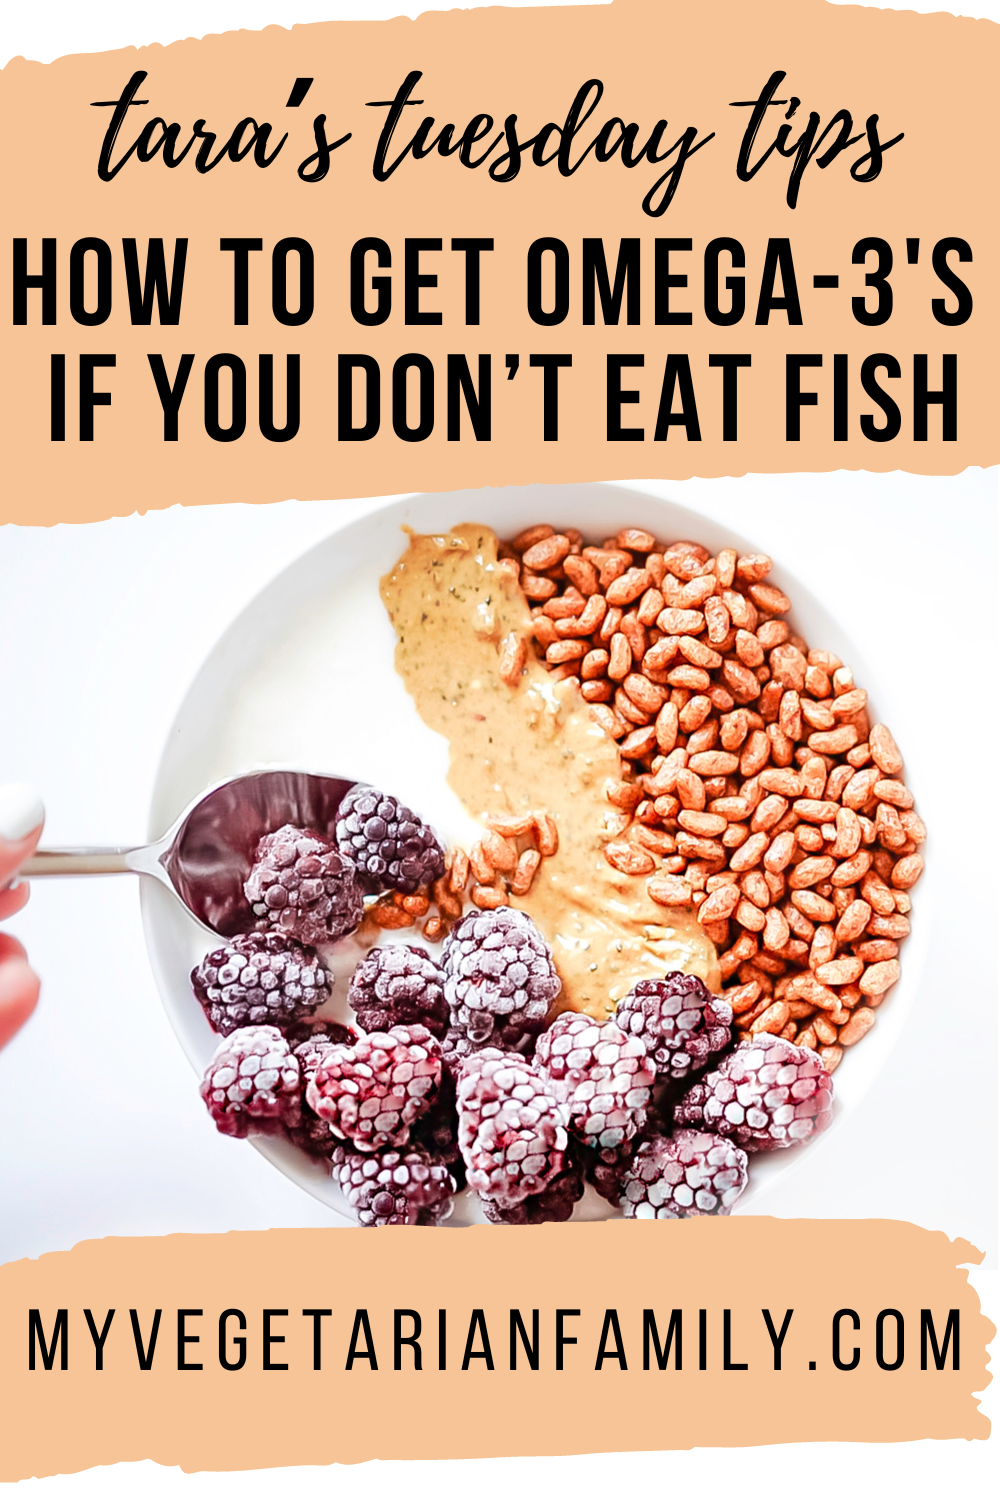 How to Get Omega-3s if You Don’t Eat Fish| My Vegetarian Family | Tara's Tuesday Tips #vegetarianomega3